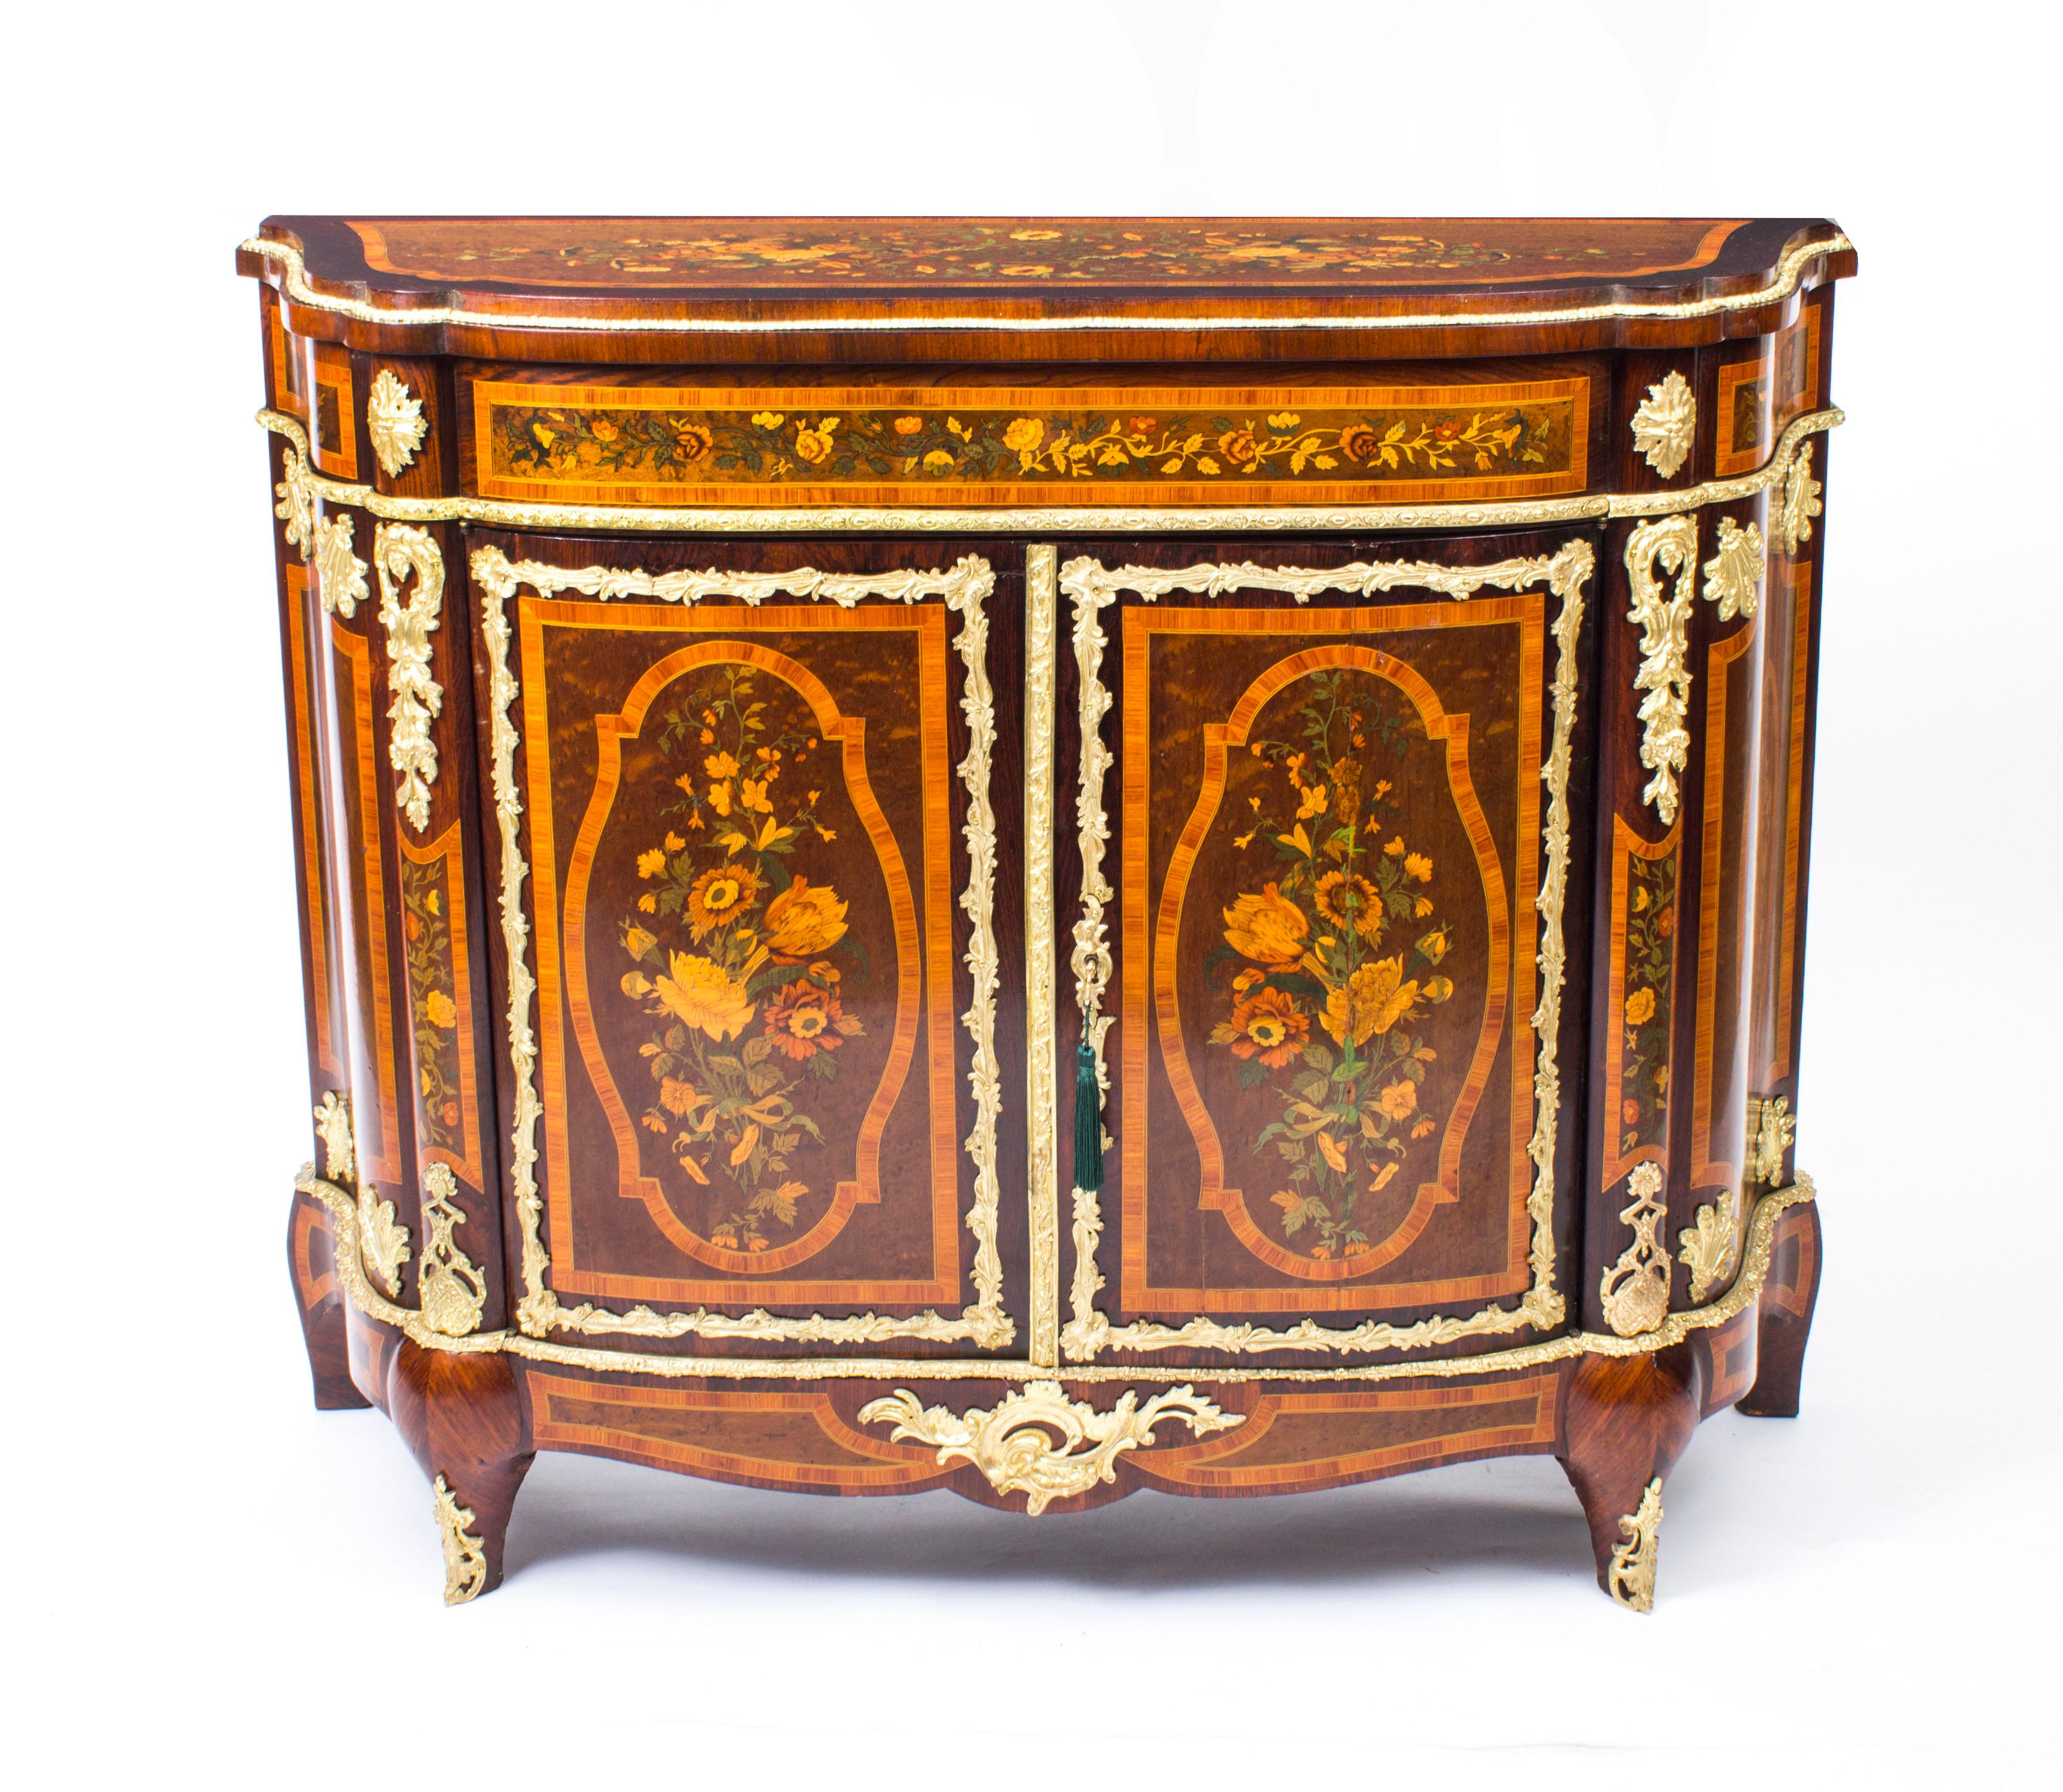 This is a superb and imposing antique French ormolu mounted, amboyna and marquetry side cabinet, C 1850 in date.

The entire piece highlights the unique and truly exceptional pattern of the floral marquetry which is set into the amboyna ground